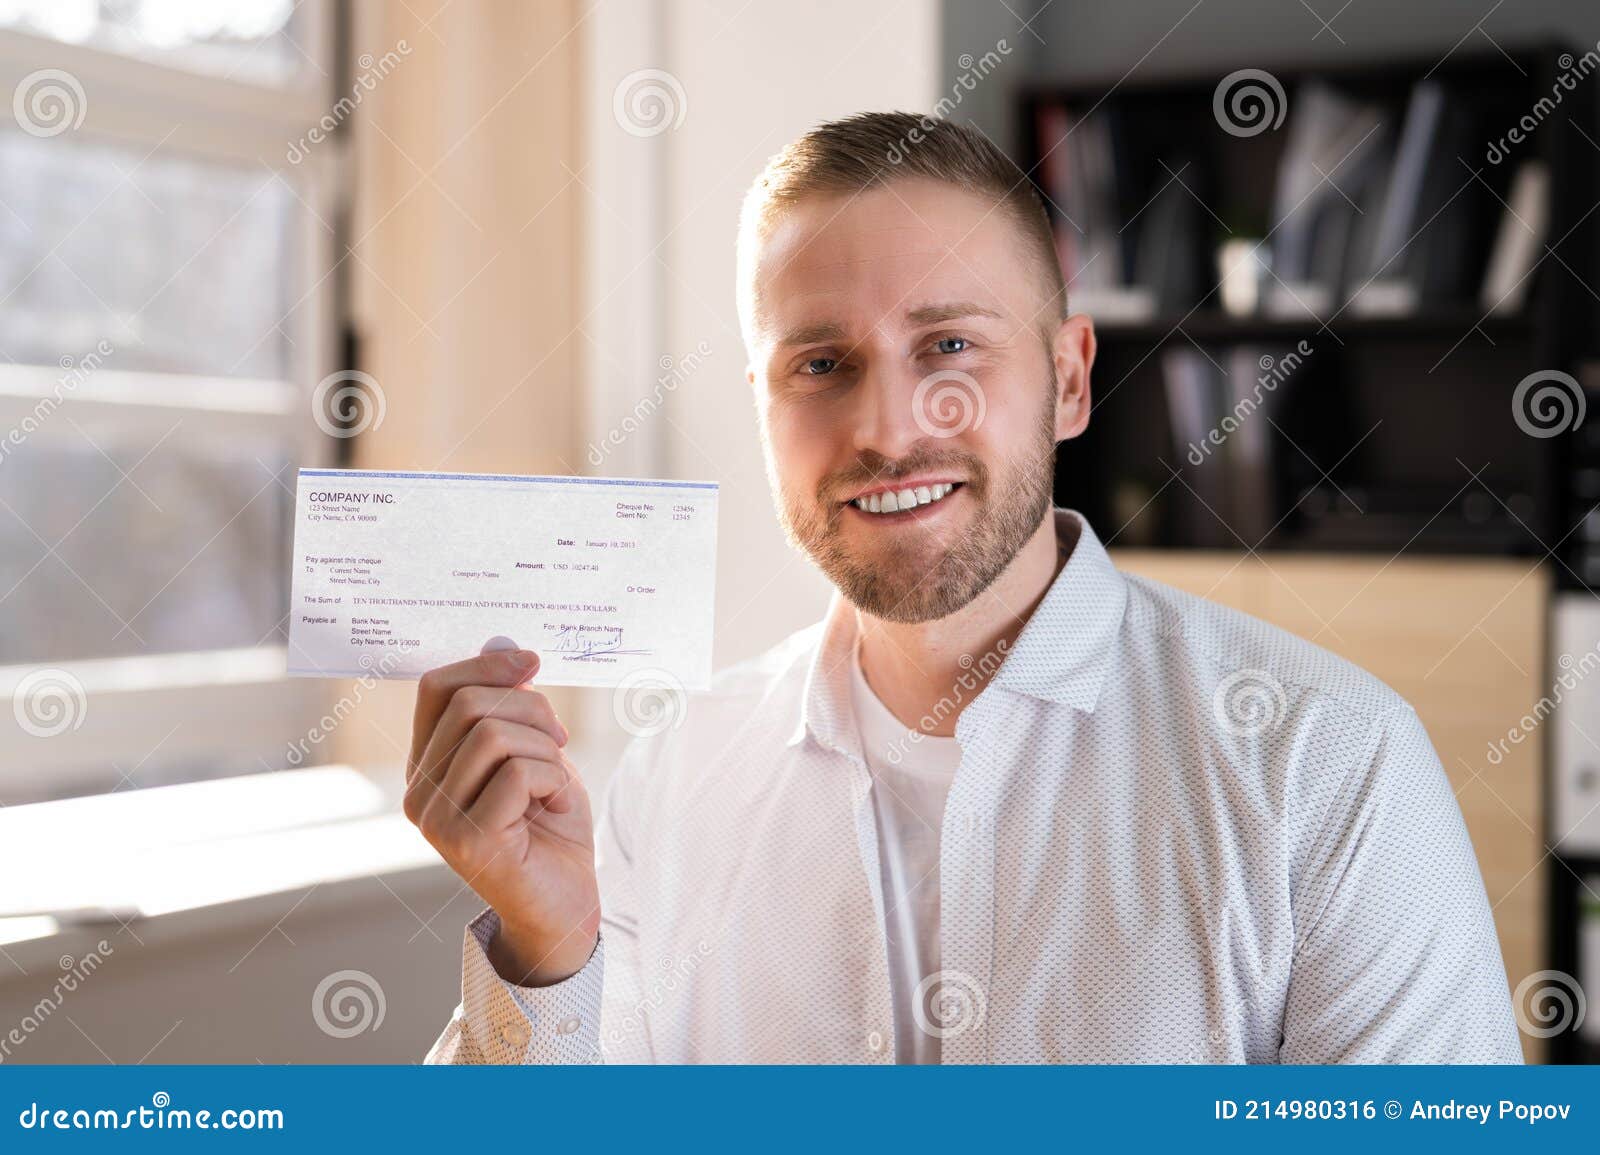 holding paycheck in hand